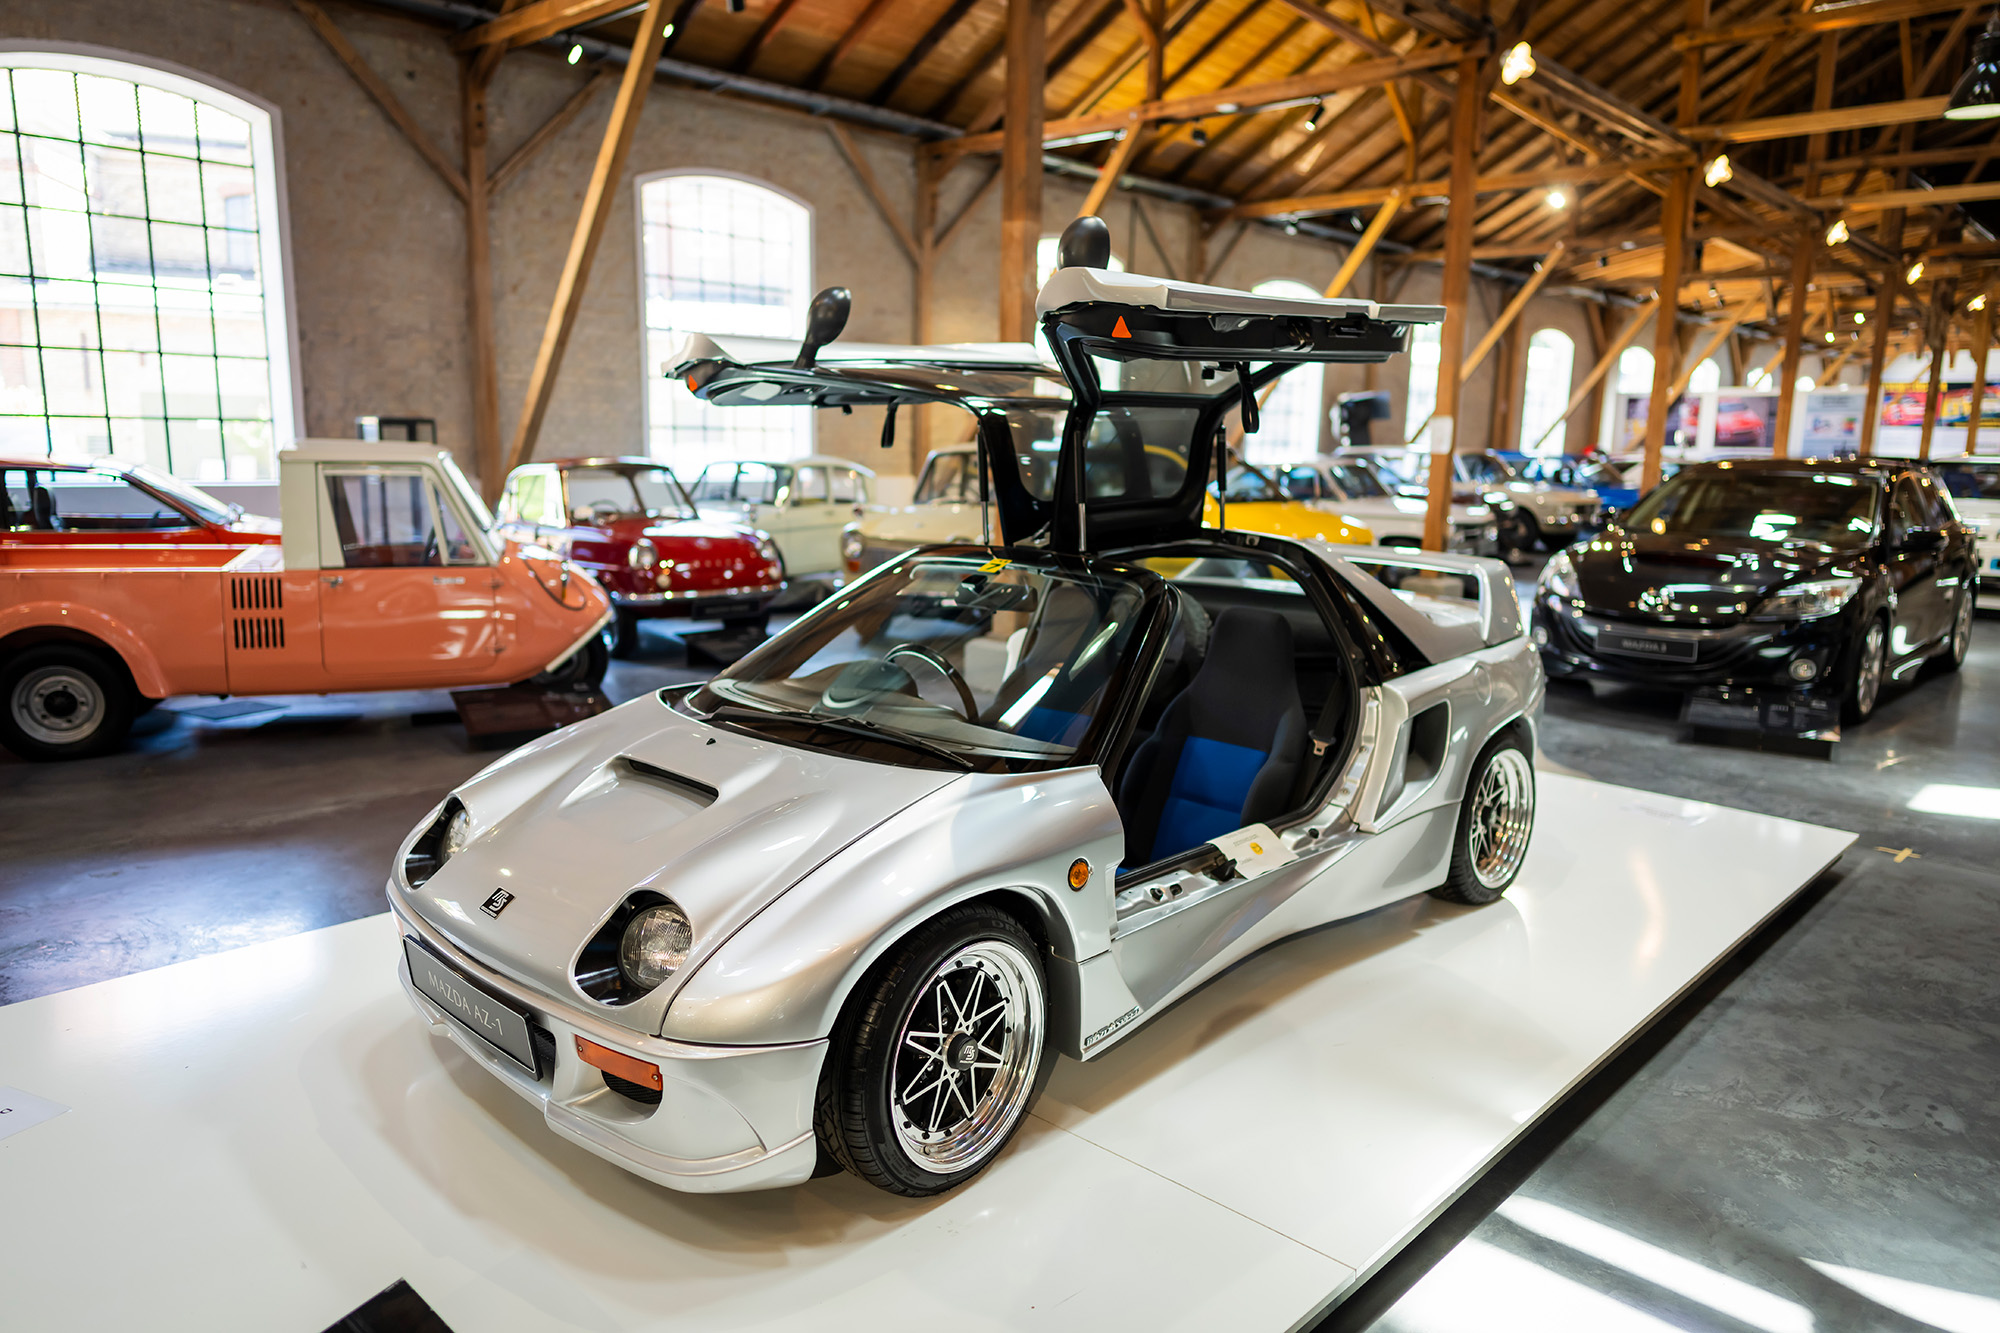 Autozam AZ-1 at the Mazda museum. Pic by Dave Smith